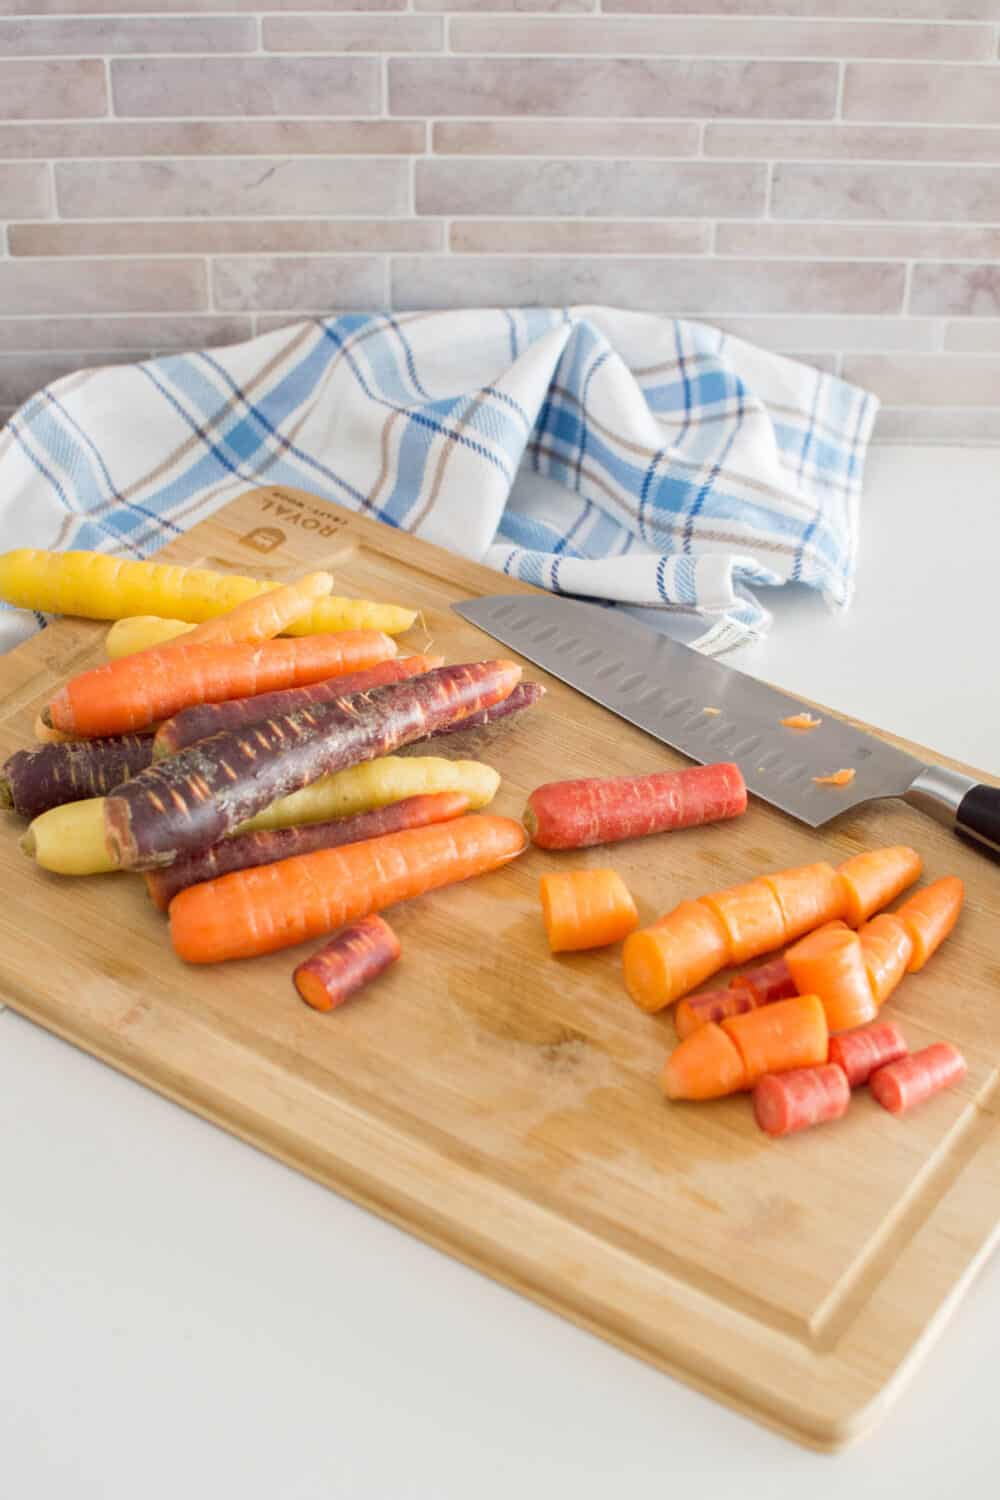 A mixture of different carrots being chopped on a wooden cutting board